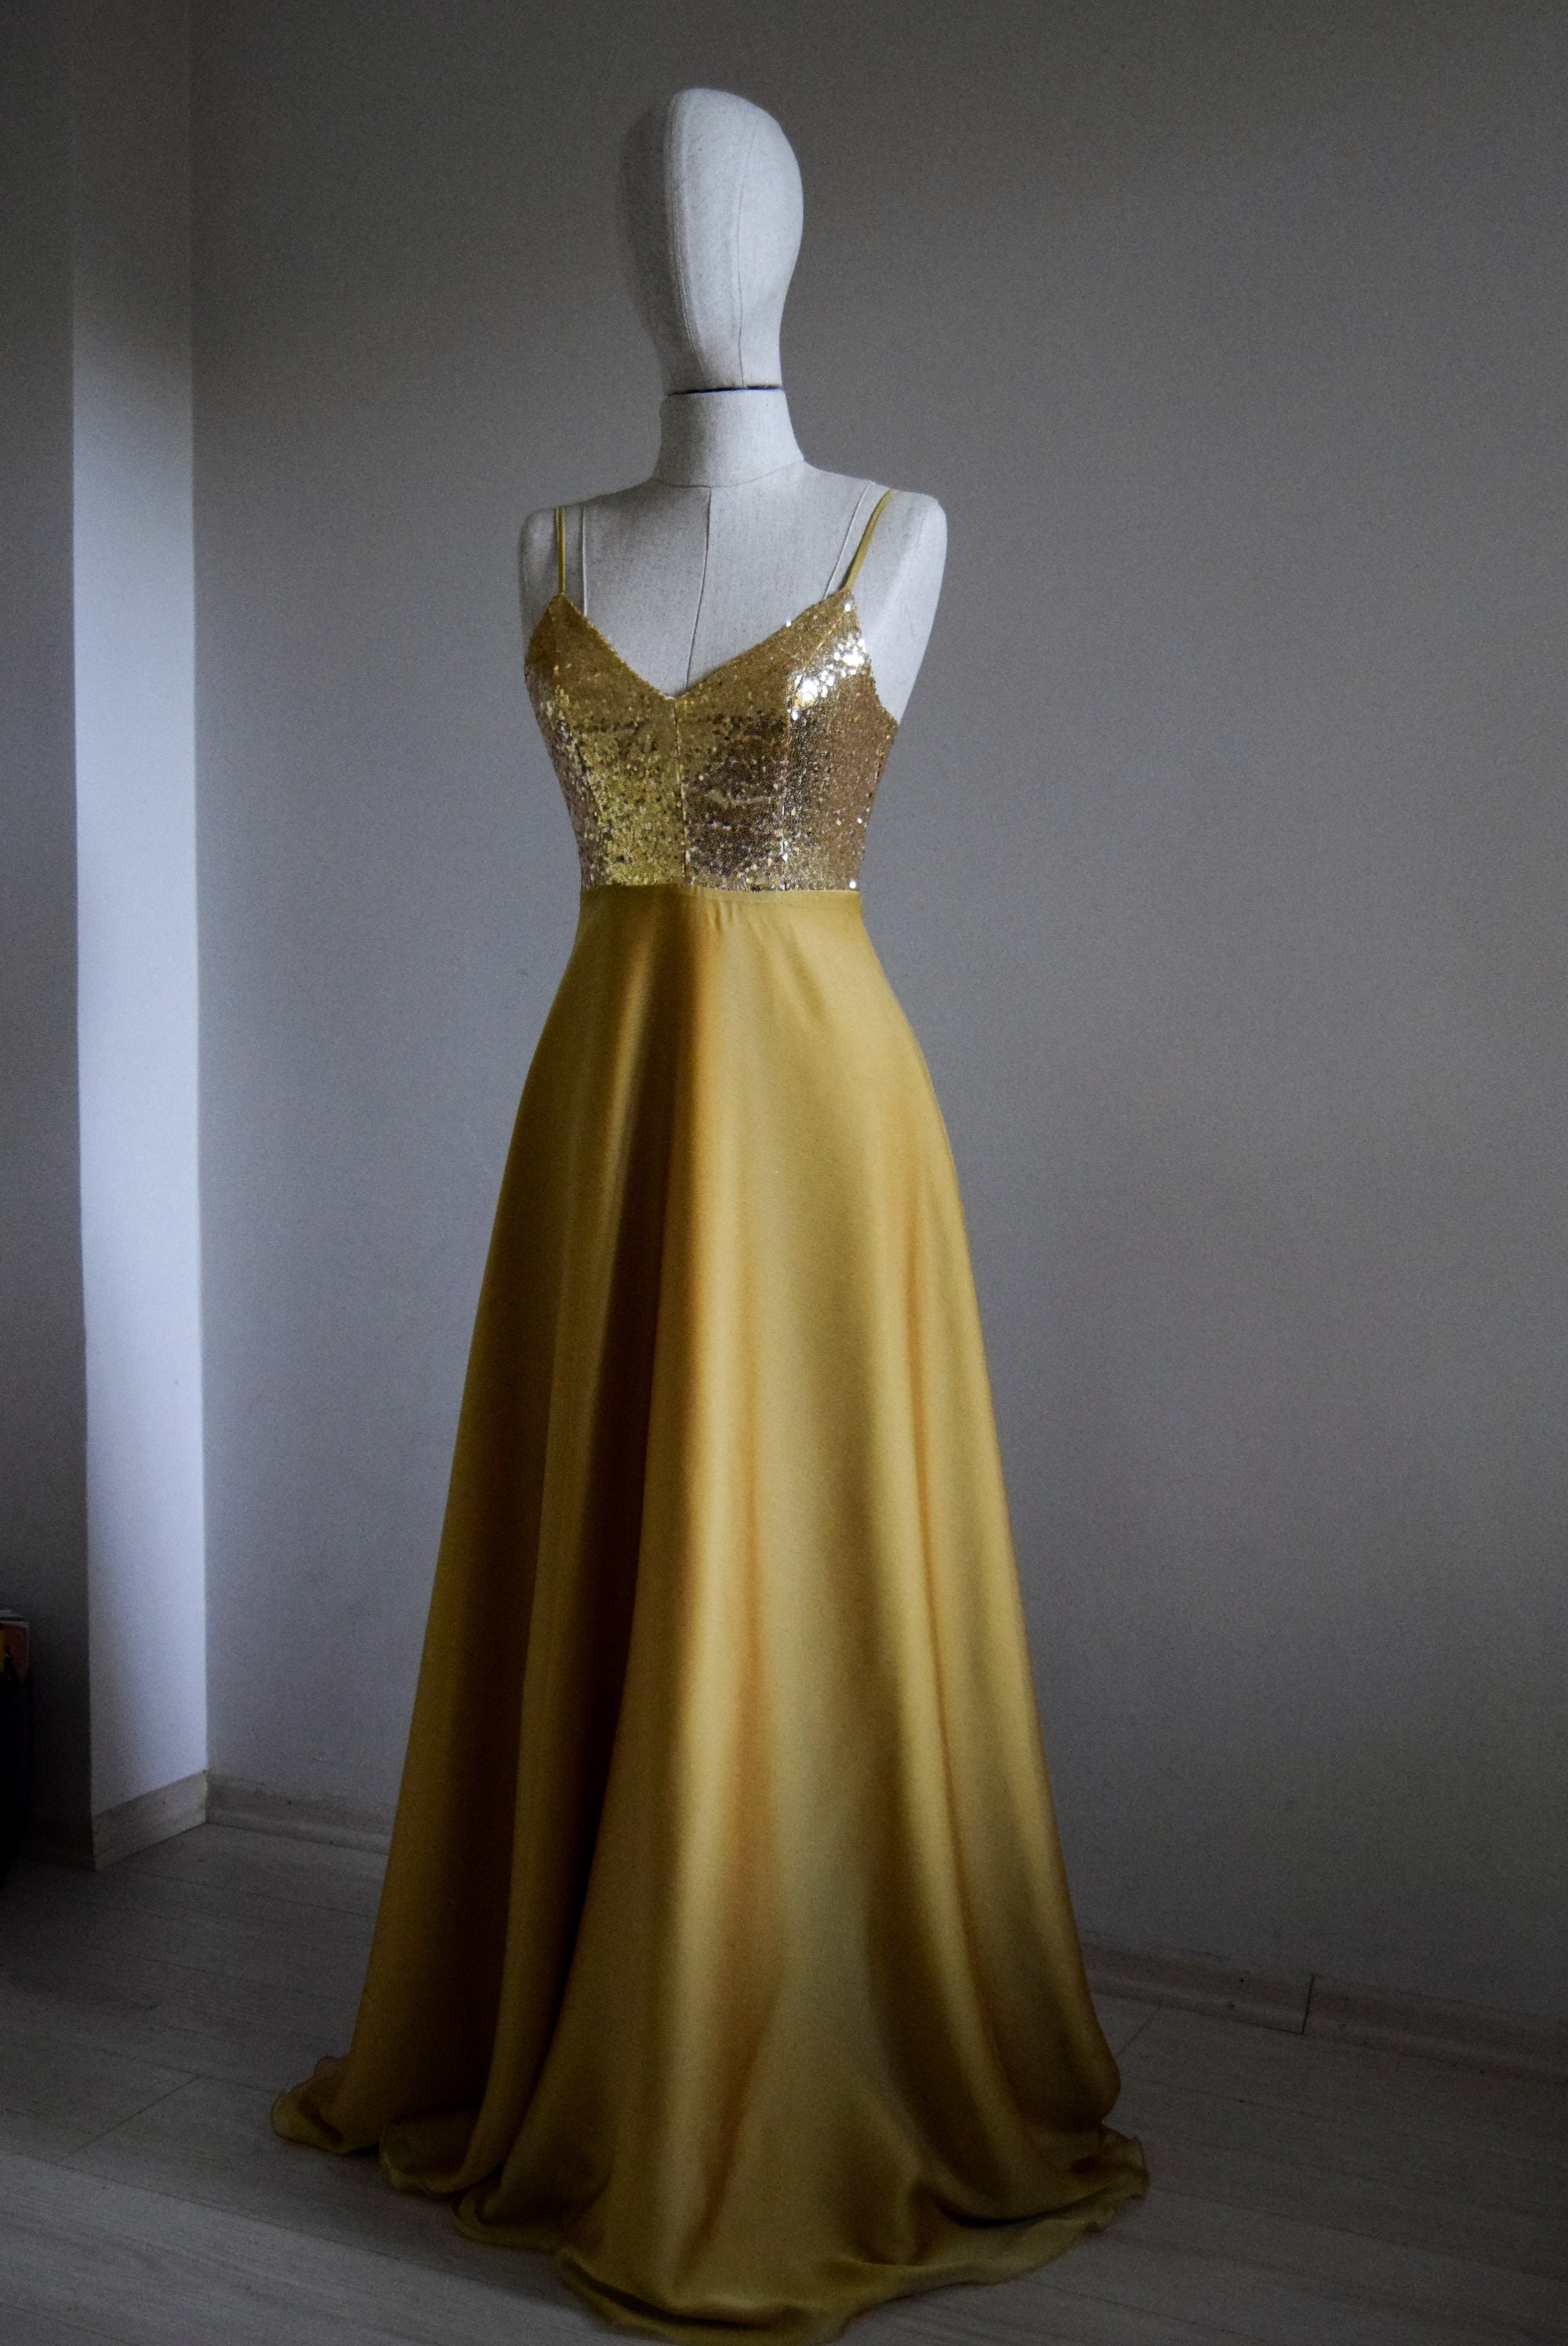 Custom Made Chiffon With Top Sequin Gold Bridesmaid Dress | Etsy